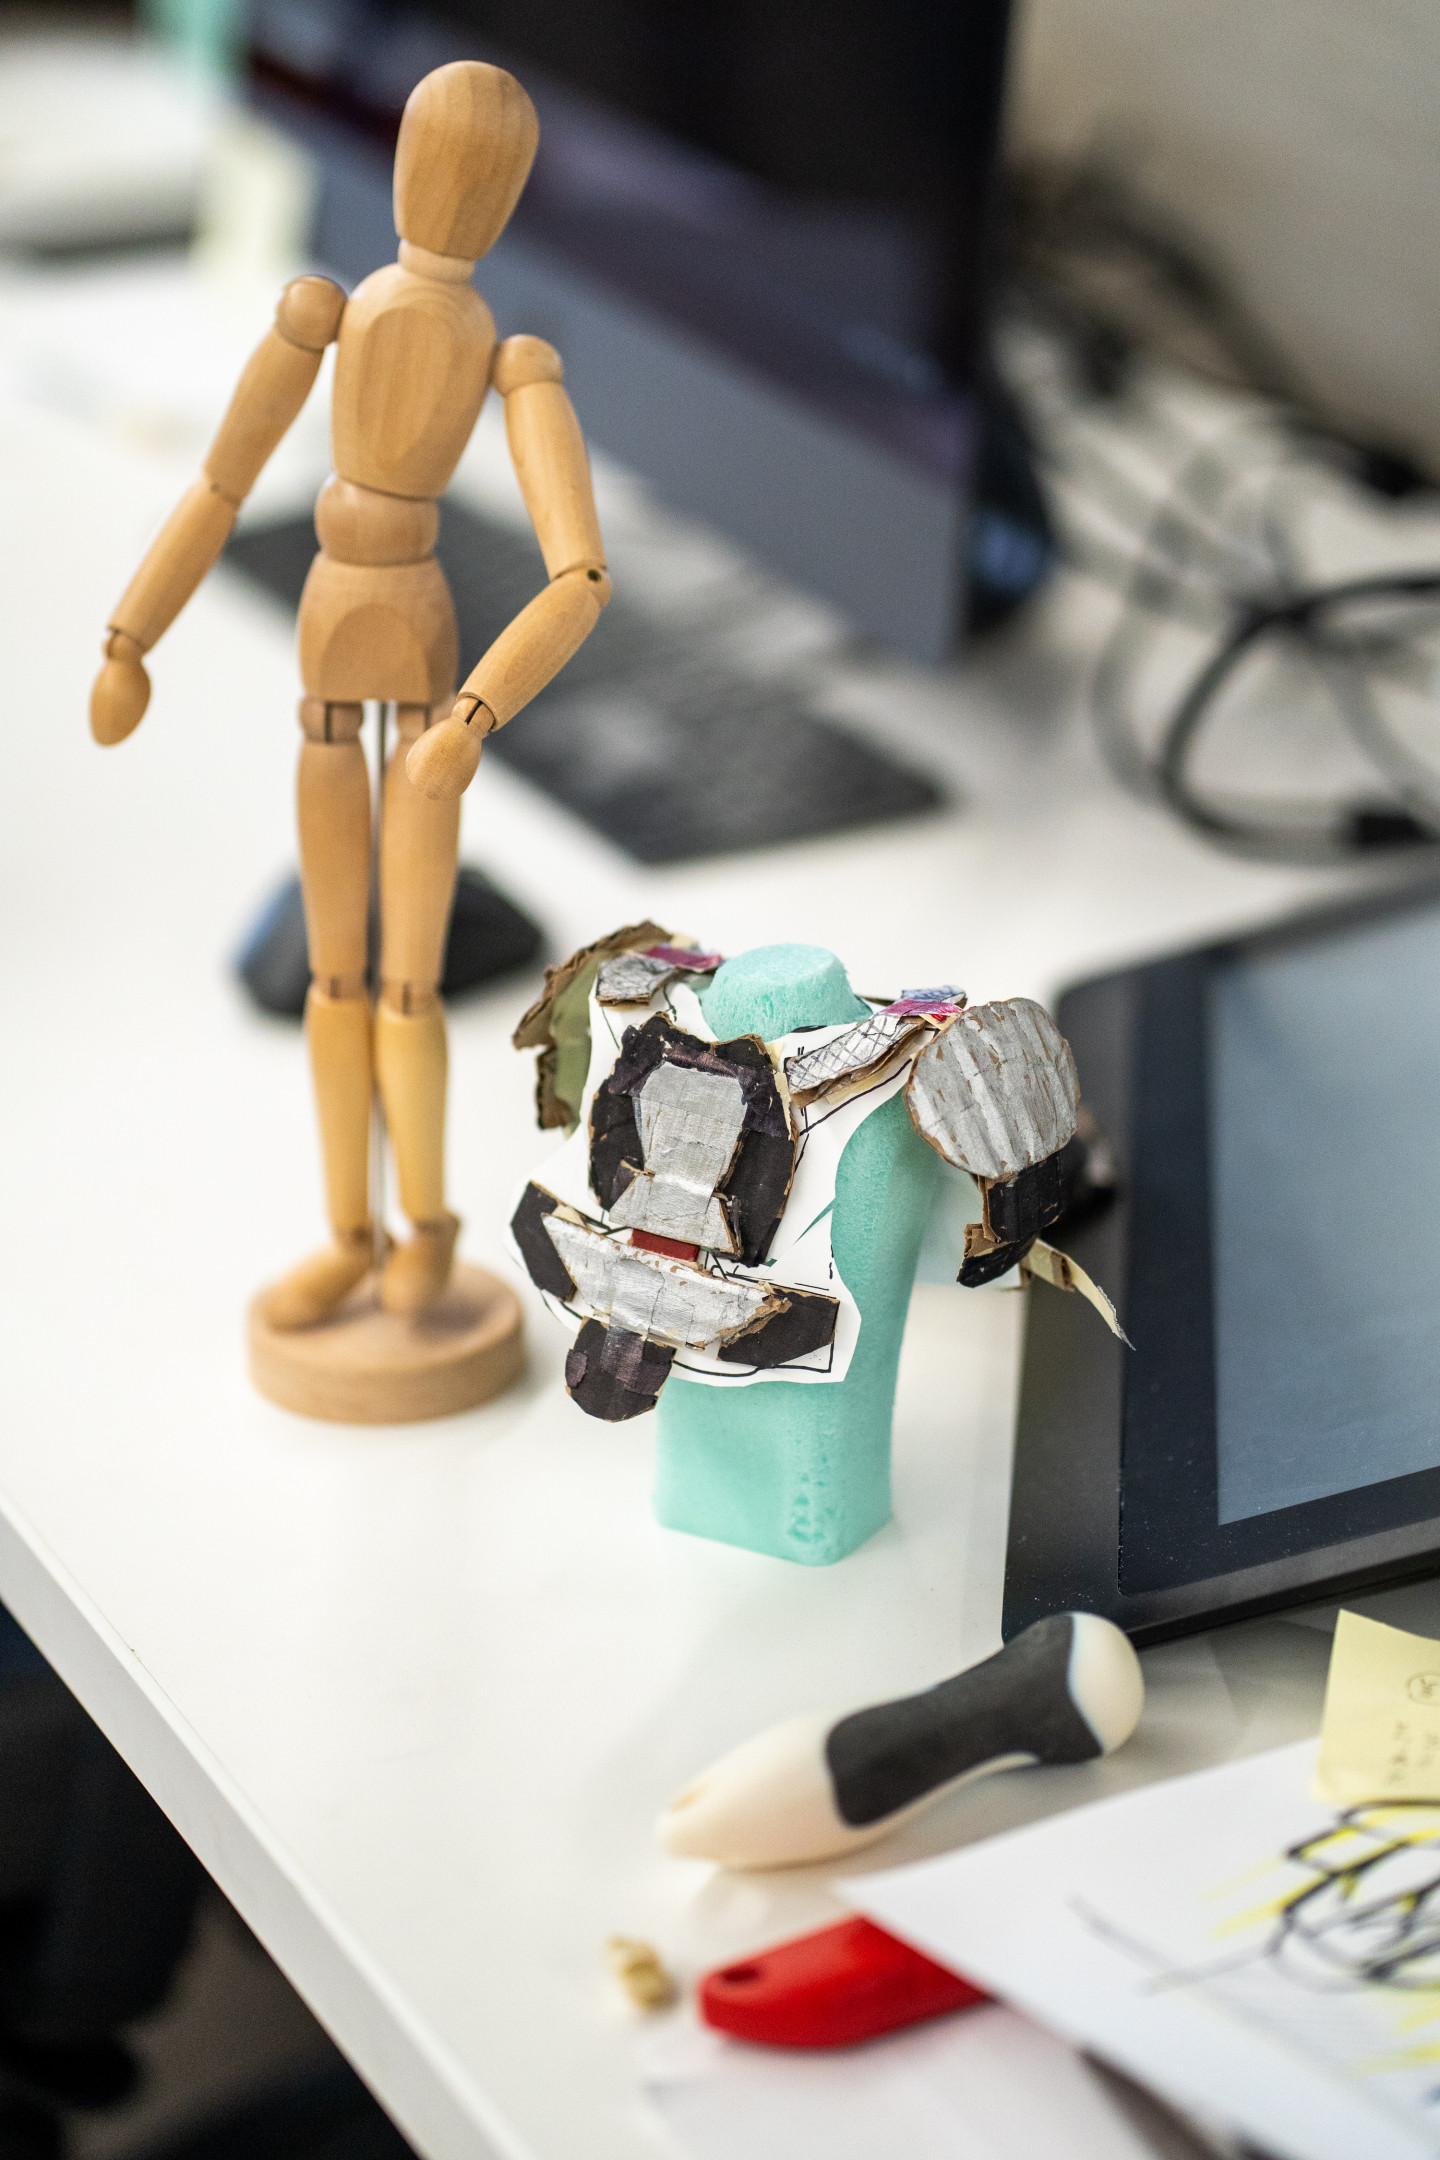 A small wooden sculpture stands next to a small paper design on a desk.